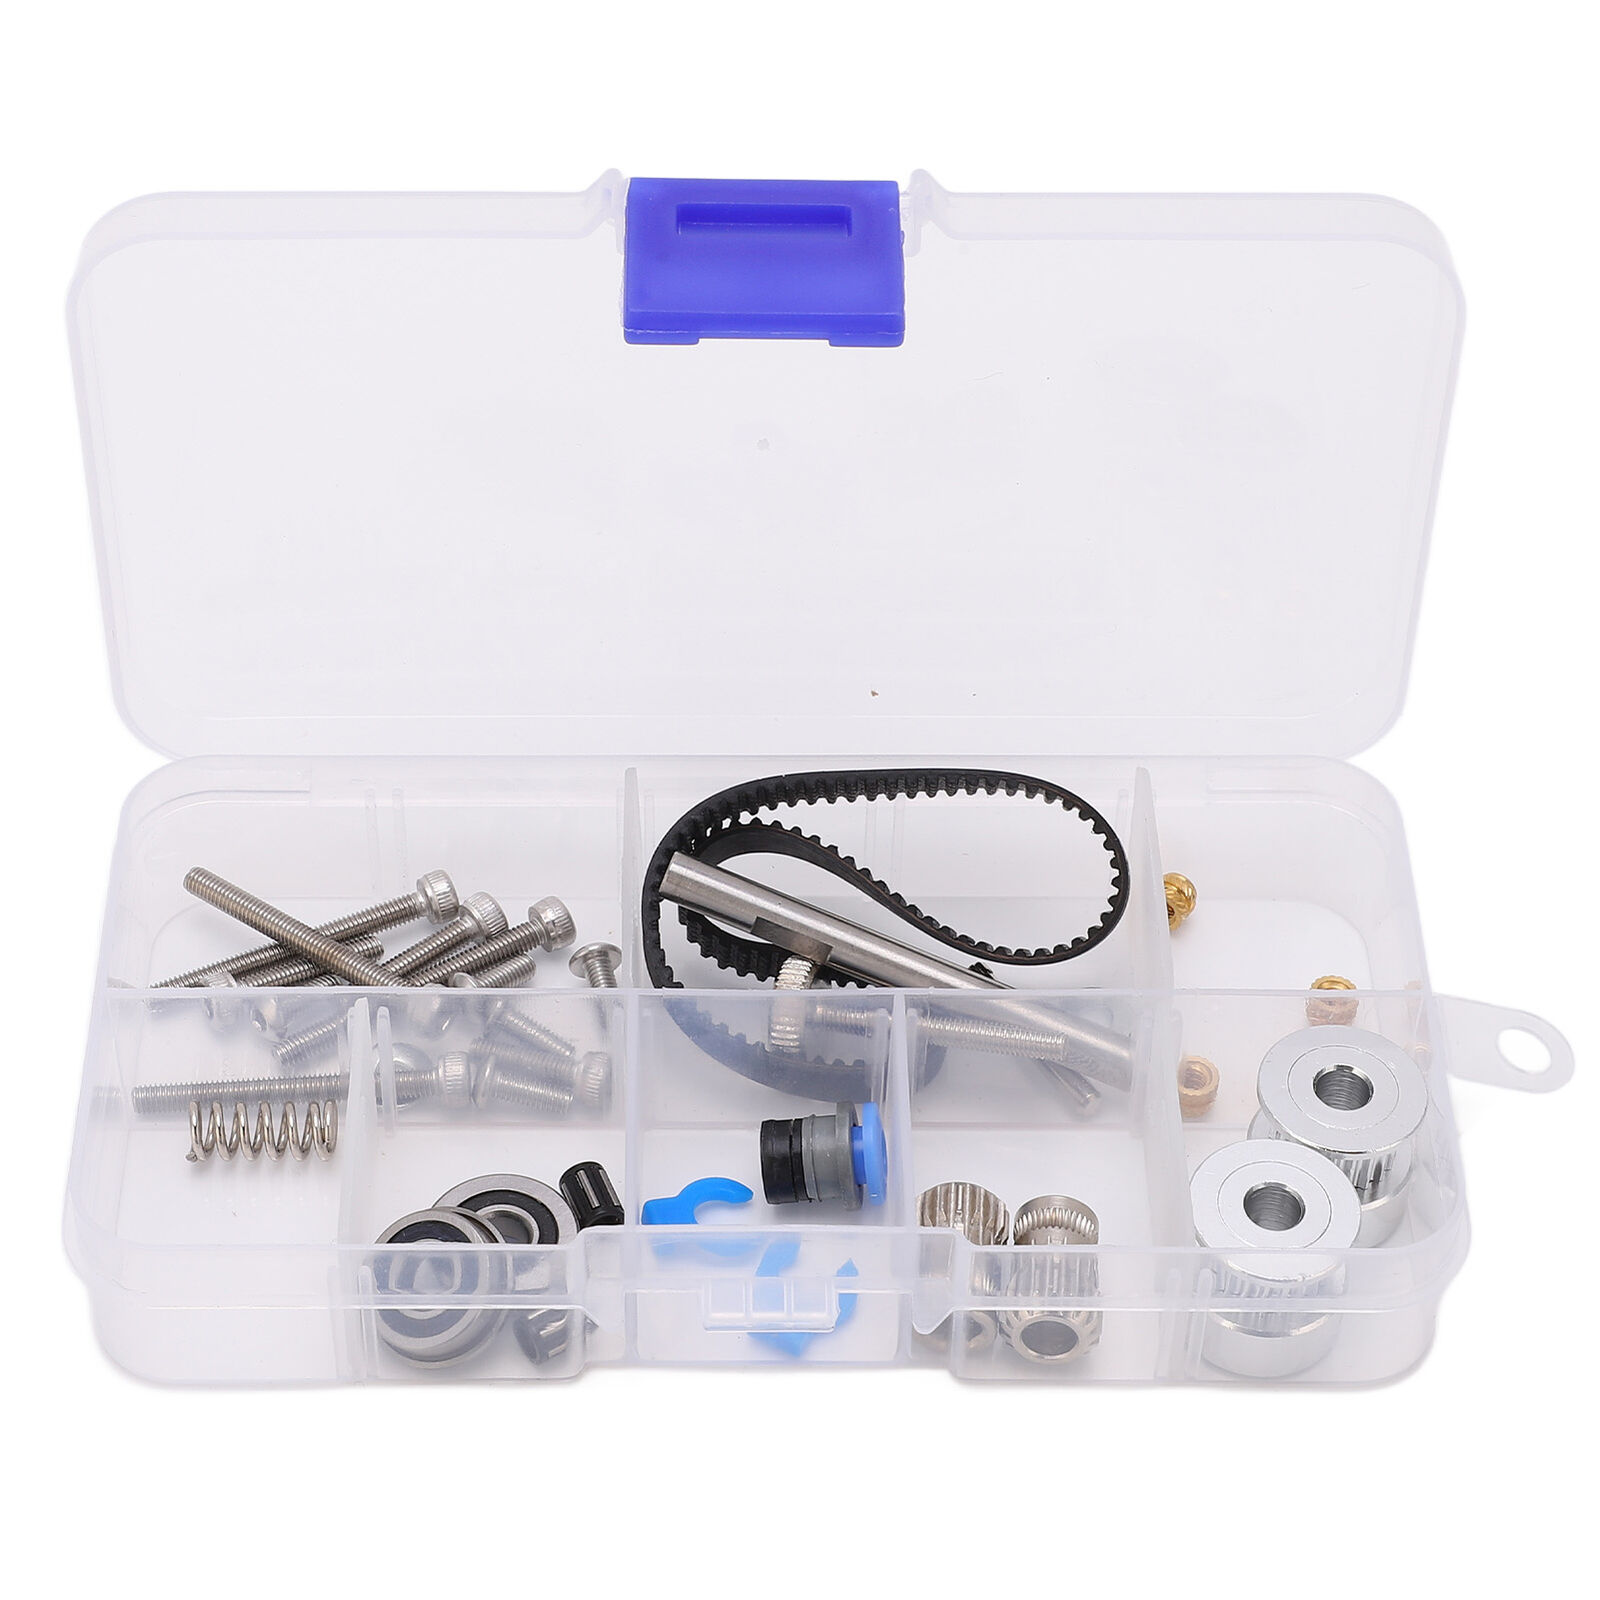 3D Printer Extruder Kit Synchronous Wheel Extrusion Gear Bearing For 3D Printers